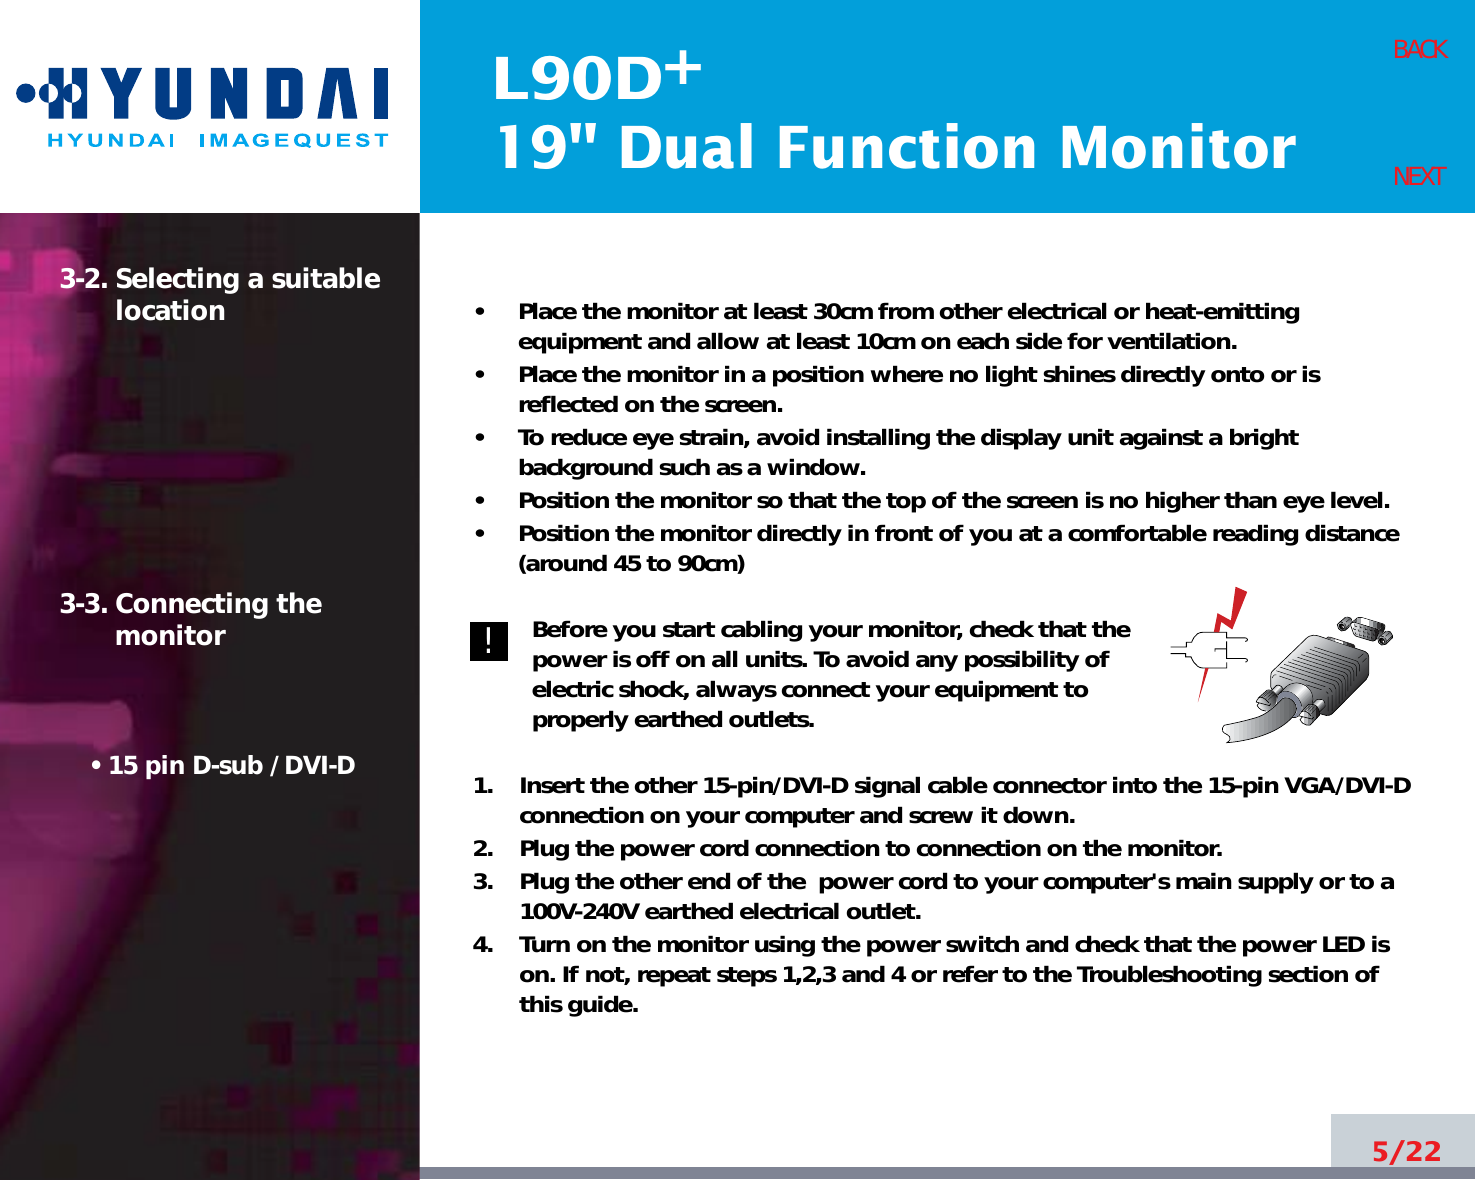 L90D19&quot; Dual Function Monitor+5/22BACKNEXT3-2. Selecting a suitablelocation3-3. Connecting the monitor• 15 pin D-sub / DVI-D•     Place the monitor at least 30cm from other electrical or heat-emittingequipment and allow at least 10cm on each side for ventilation.•     Place the monitor in a position where no light shines directly onto or isreflected on the screen.•     To reduce eye strain, avoid installing the display unit against a brightbackground such as a window.•     Position the monitor so that the top of the screen is no higher than eye level.•     Position the monitor directly in front of you at a comfortable reading distance(around 45 to 90cm) Before you start cabling your monitor, check that thepower is off on all units. To avoid any possibility ofelectric shock, always connect your equipment toproperly earthed outlets.1.    Insert the other 15-pin/DVI-D signal cable connector into the 15-pin VGA/DVI-Dconnection on your computer and screw it down. 2.    Plug the power cord connection to connection on the monitor.3.    Plug the other end of the  power cord to your computer&apos;s main supply or to a100V-240V earthed electrical outlet.4.    Turn on the monitor using the power switch and check that the power LED ison. If not, repeat steps 1,2,3 and 4 or refer to the Troubleshooting section ofthis guide.!!